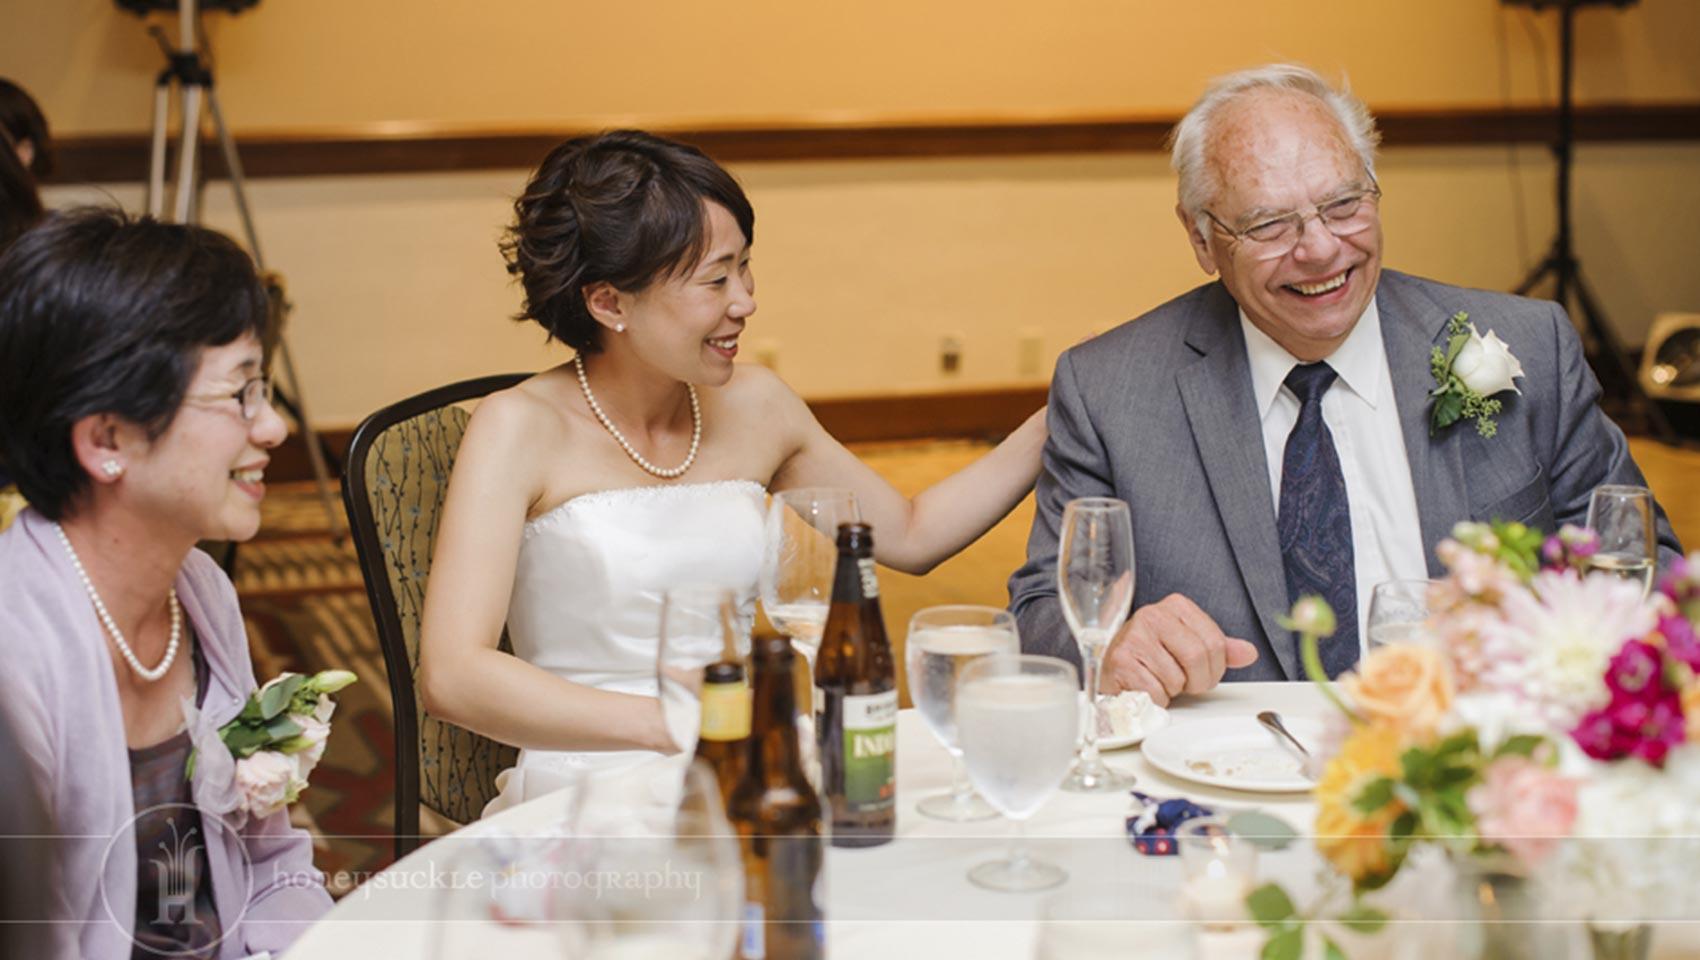 bride sitting and smiling with parents at wedding reception